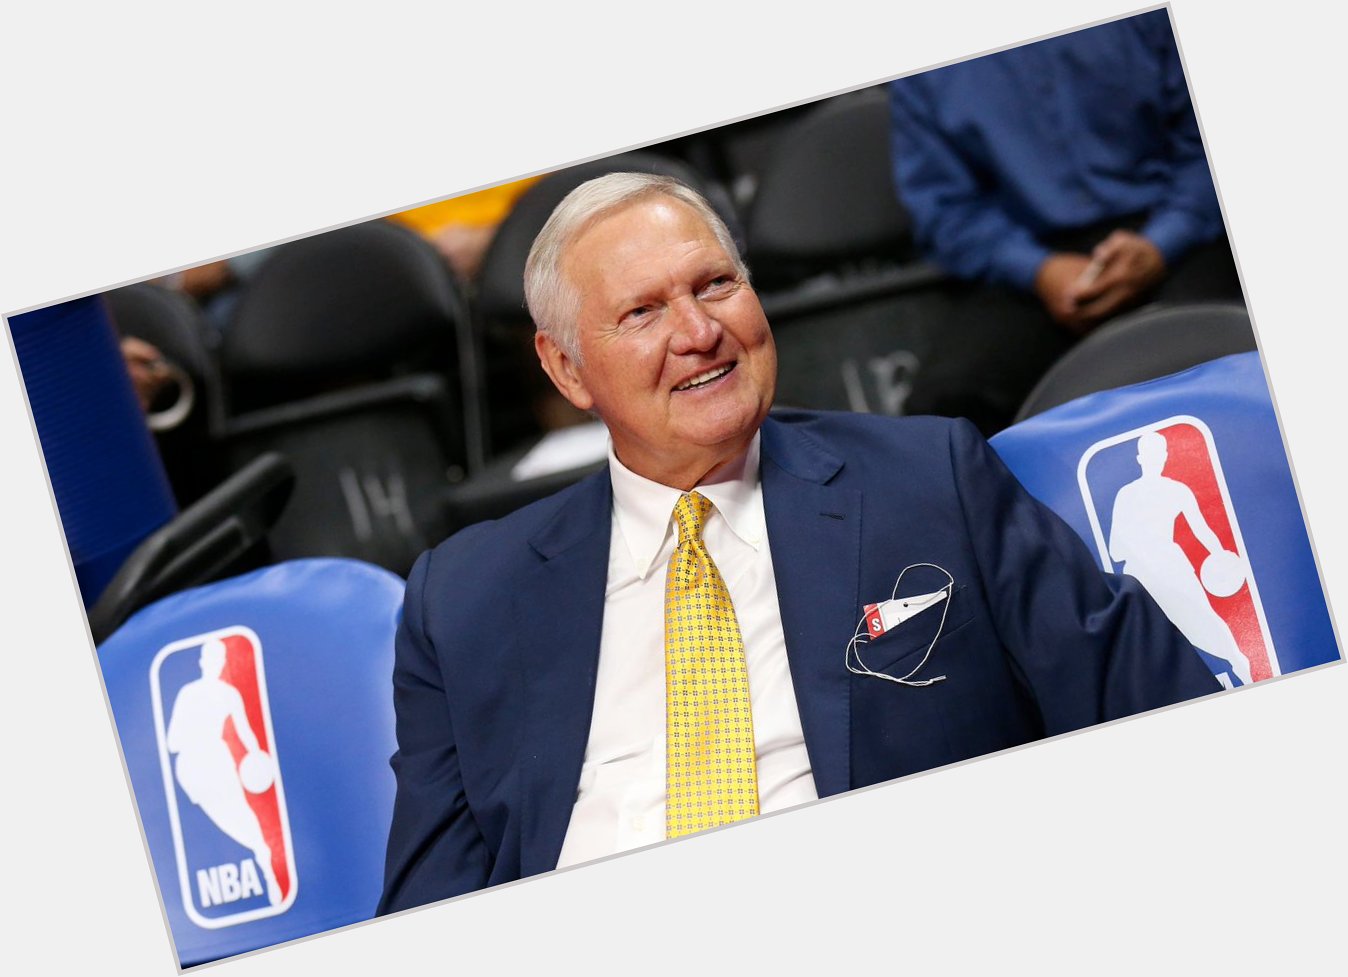 There are plenty of basketball legends, but only one Logo.  Happy birthday, Jerry West!
( : 